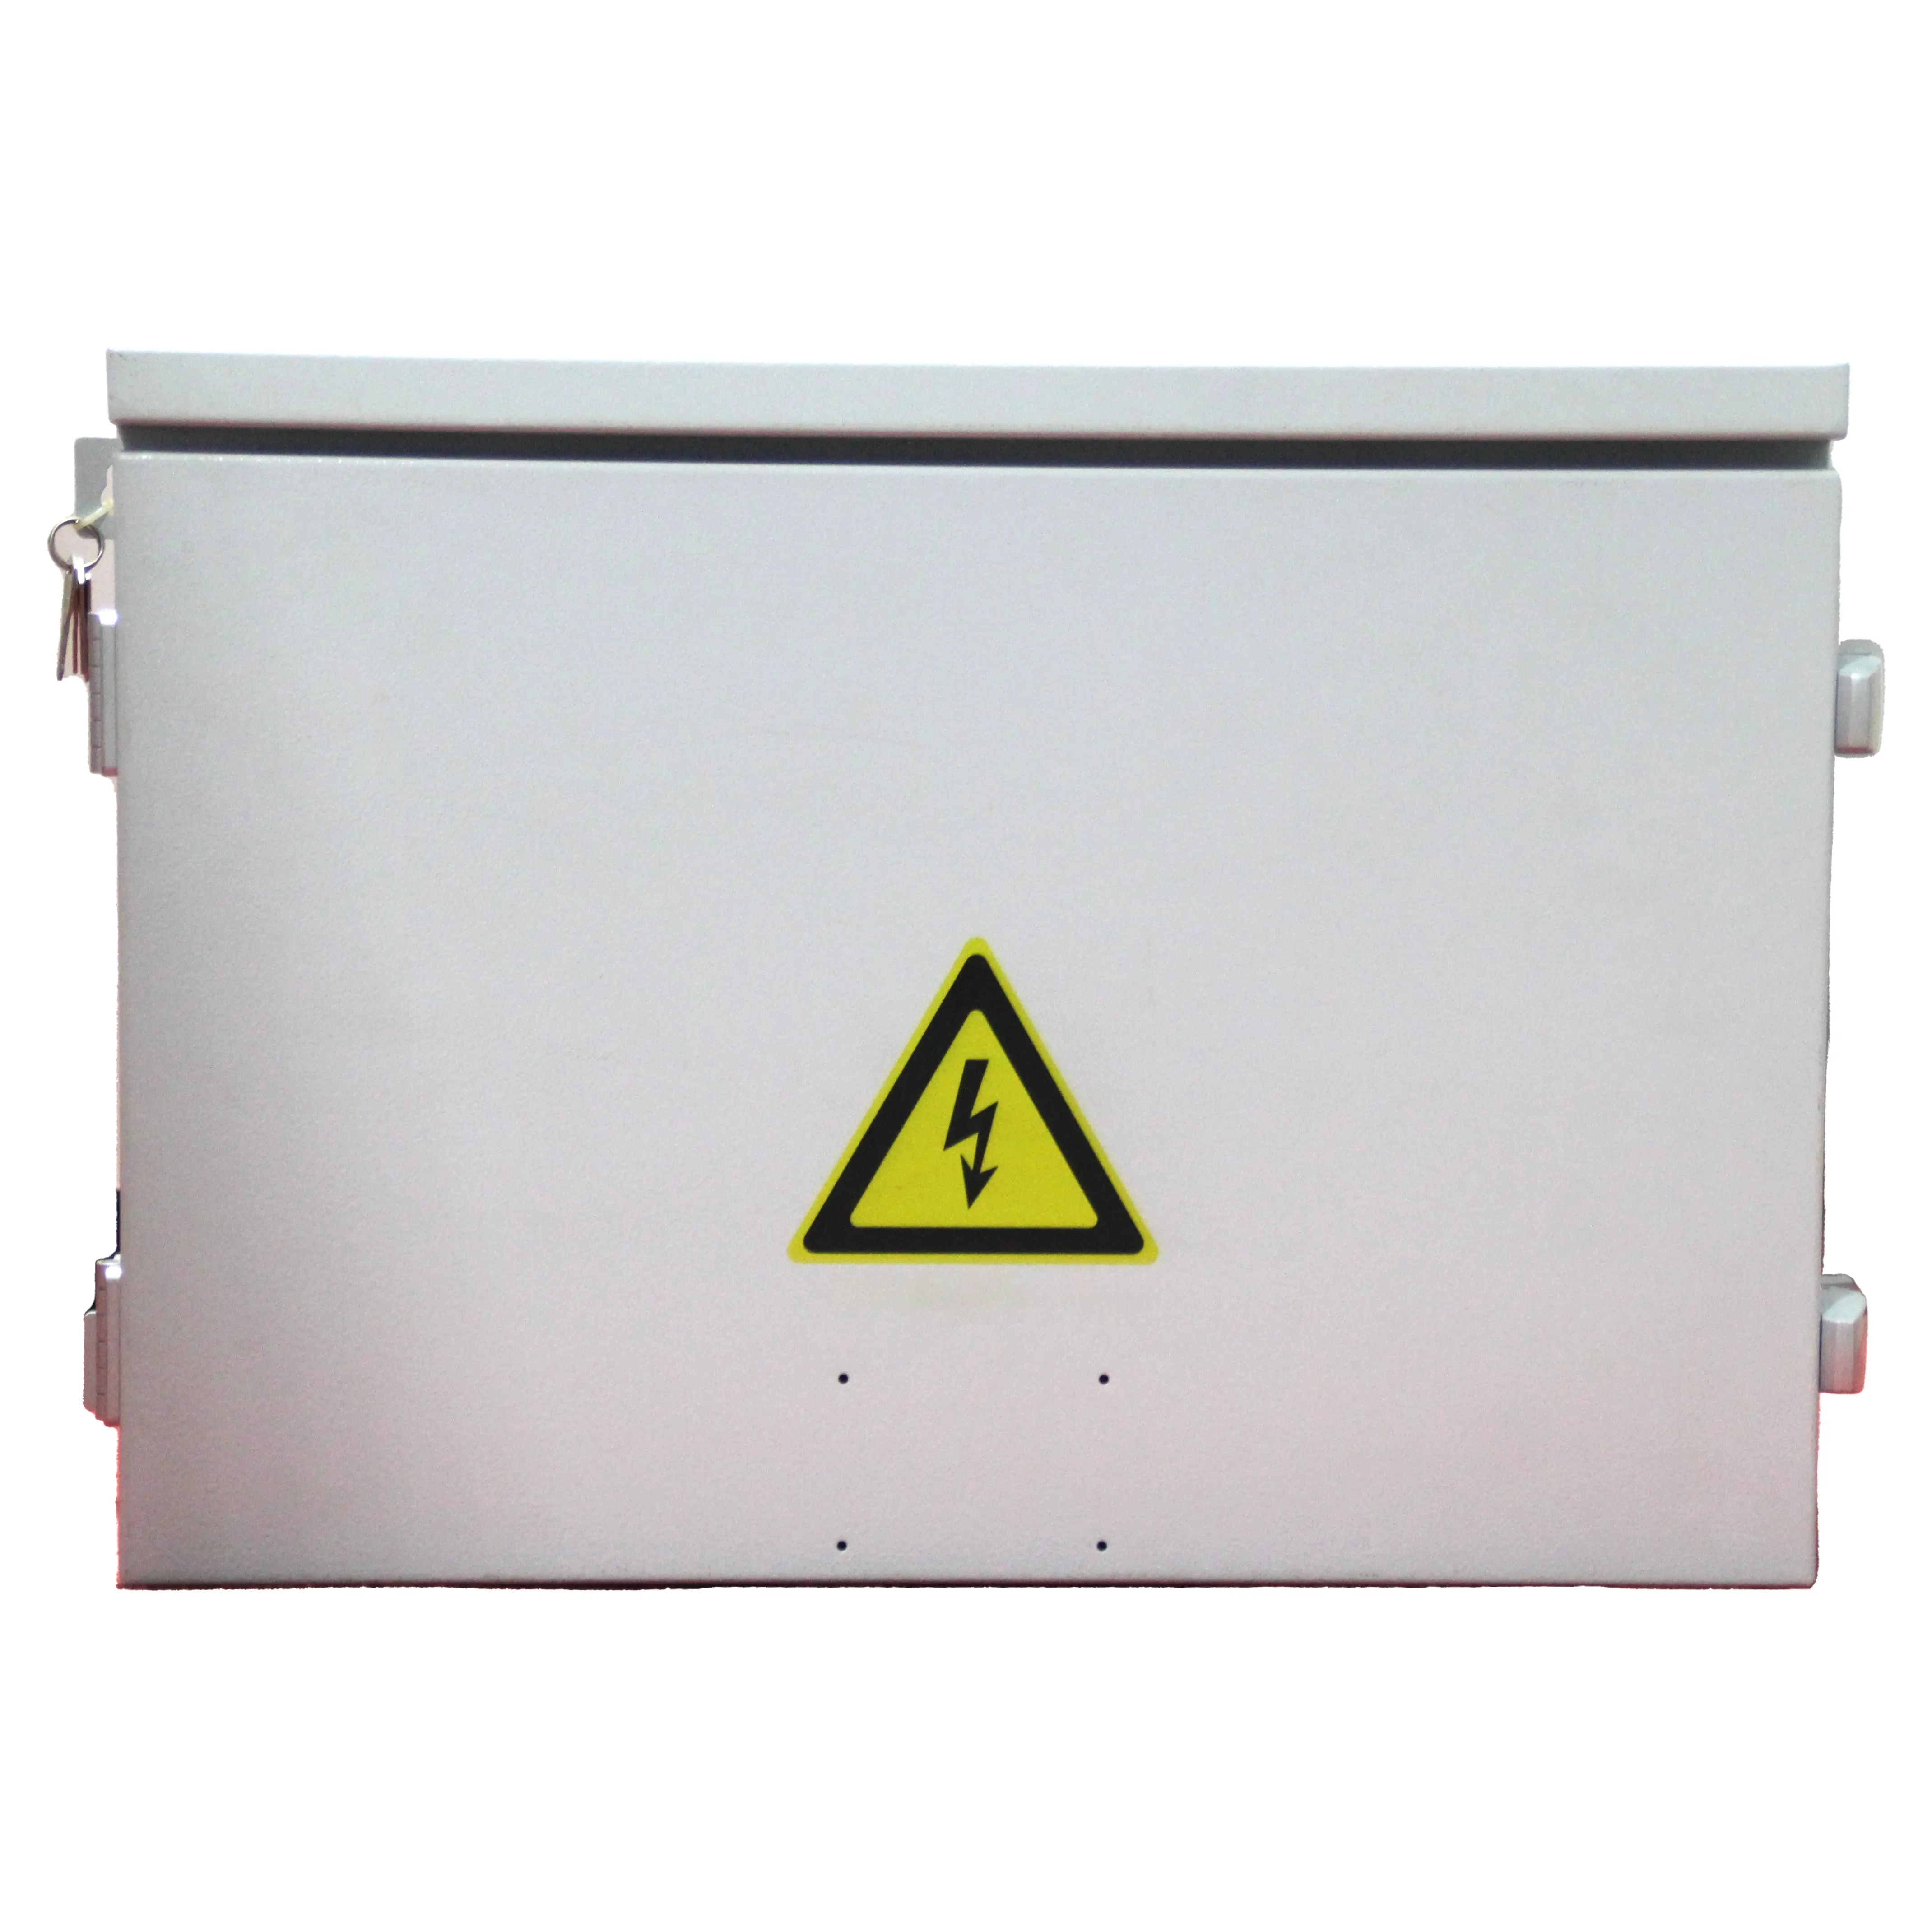 High-quality emergency lighting cabinets: ensuring safety in critical situations